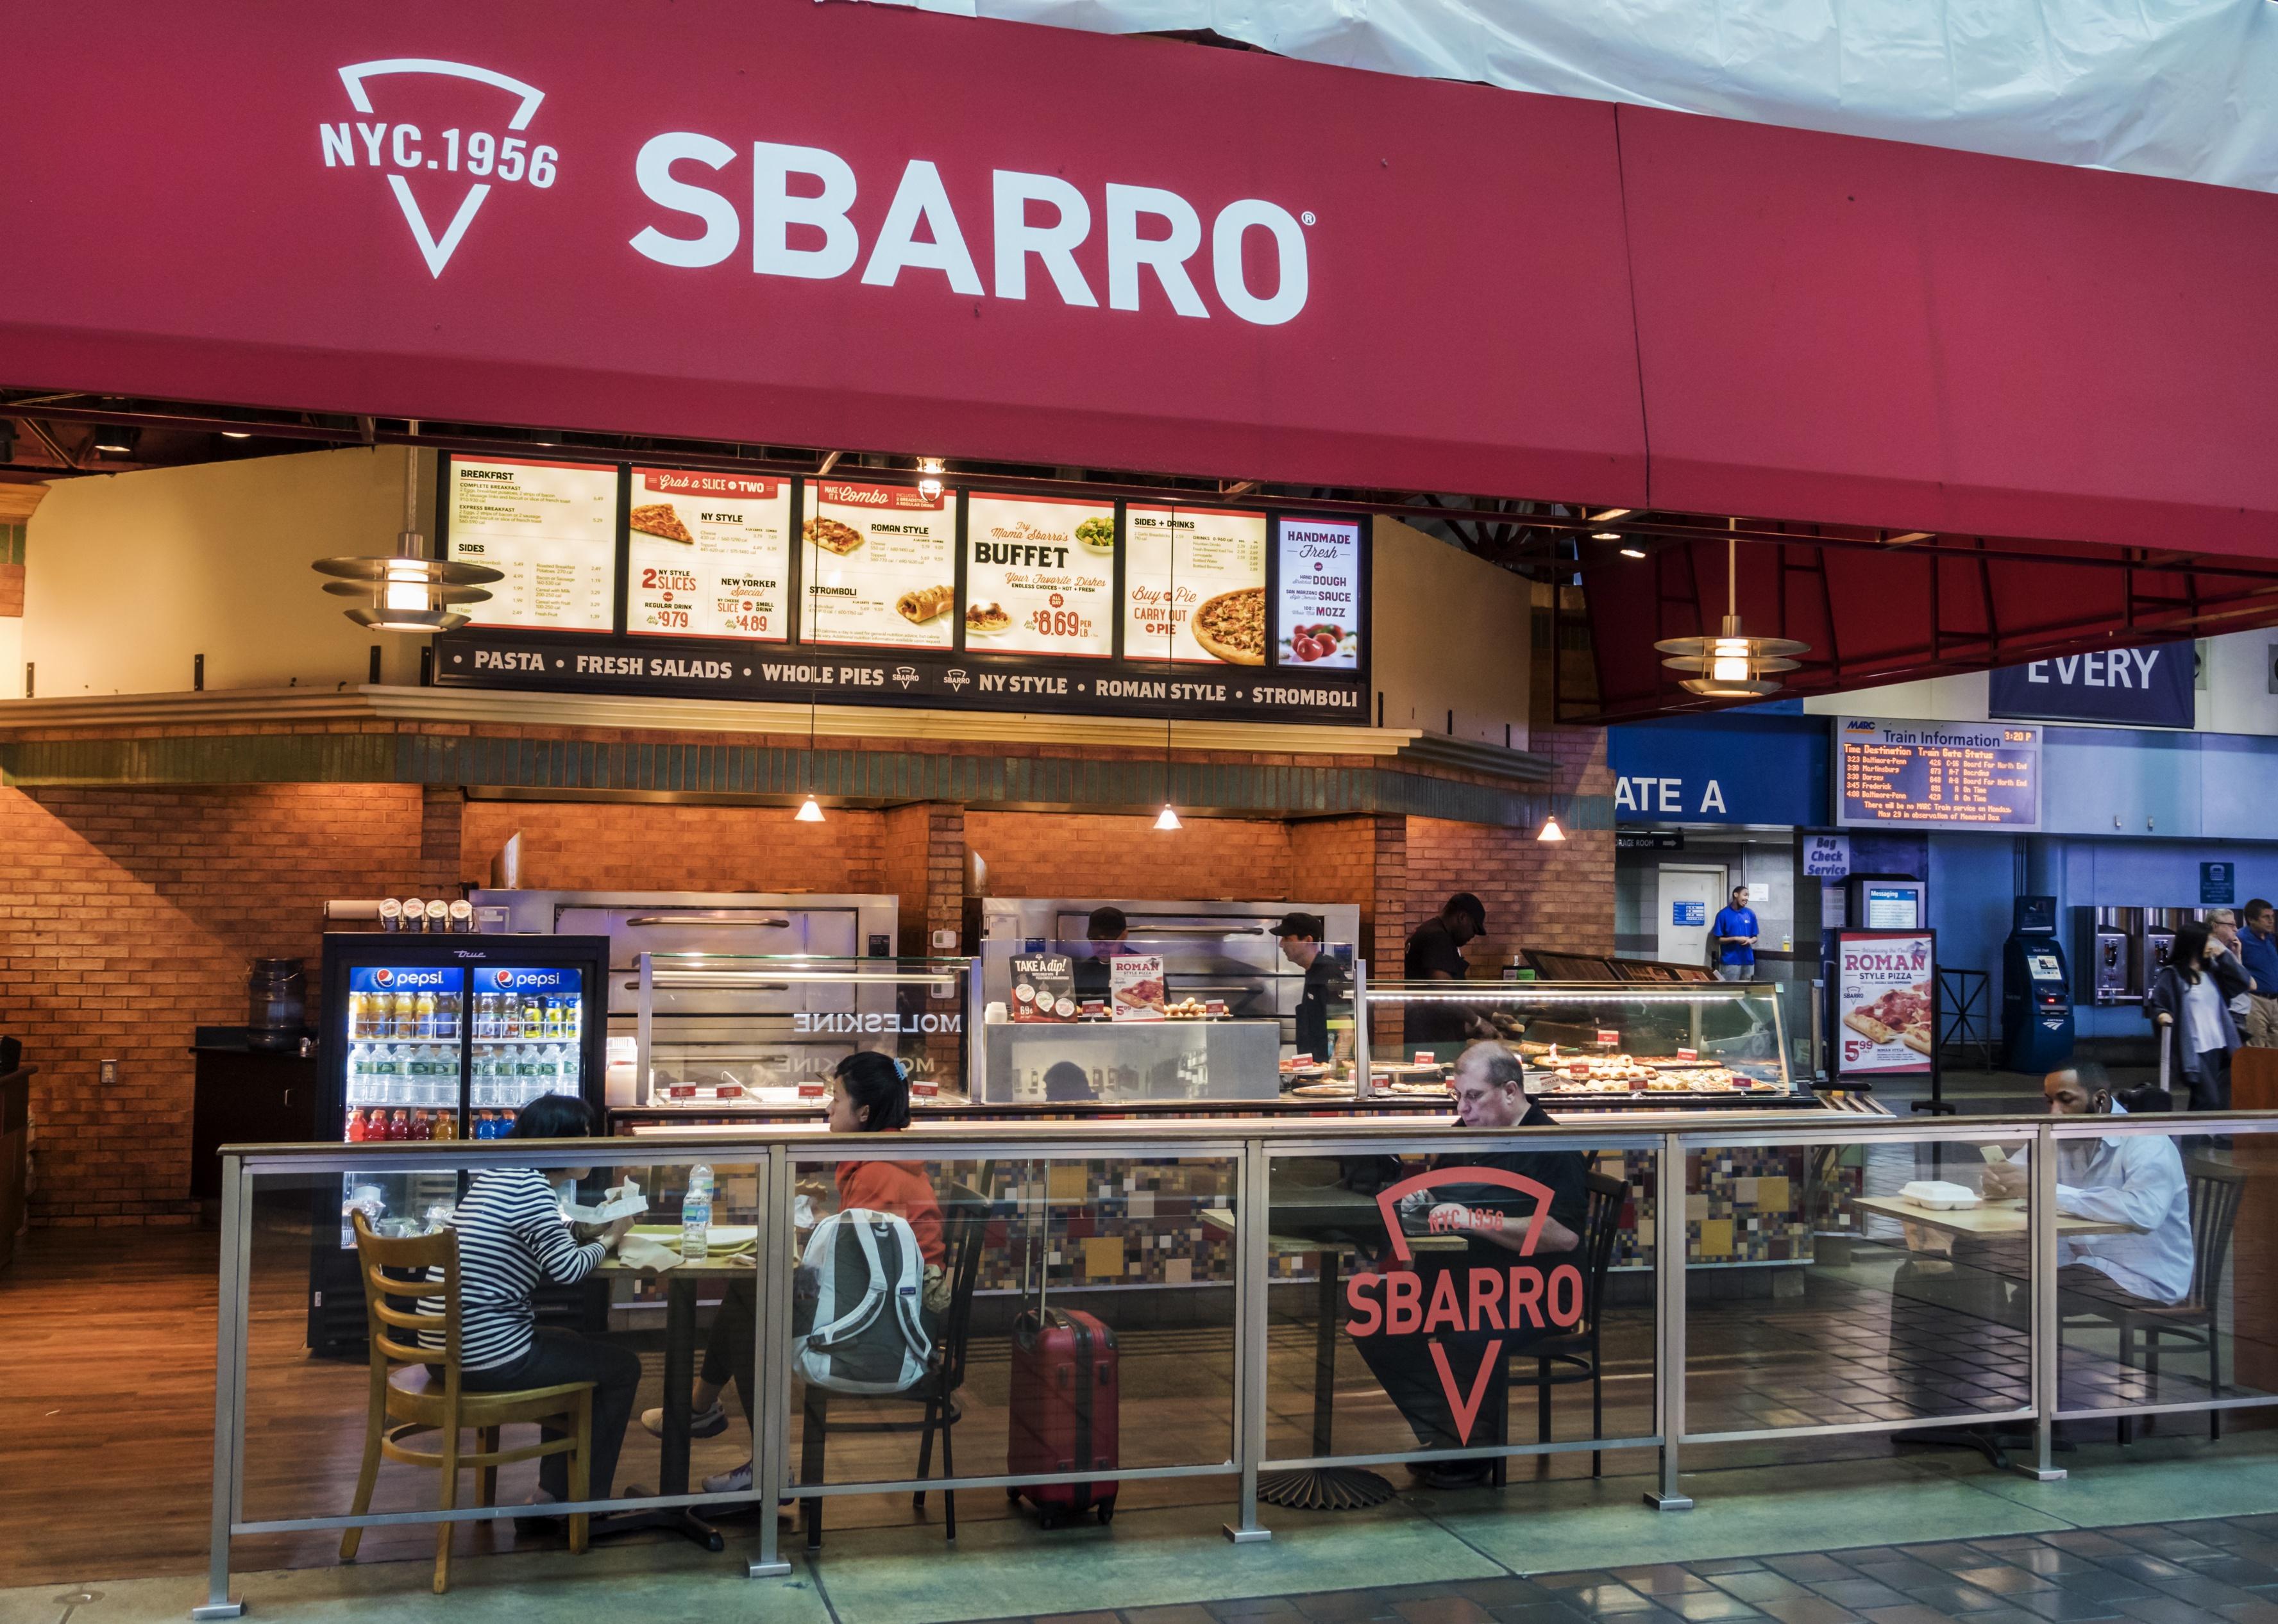 People sitting and eating at an Sbarro restaurant in union station.